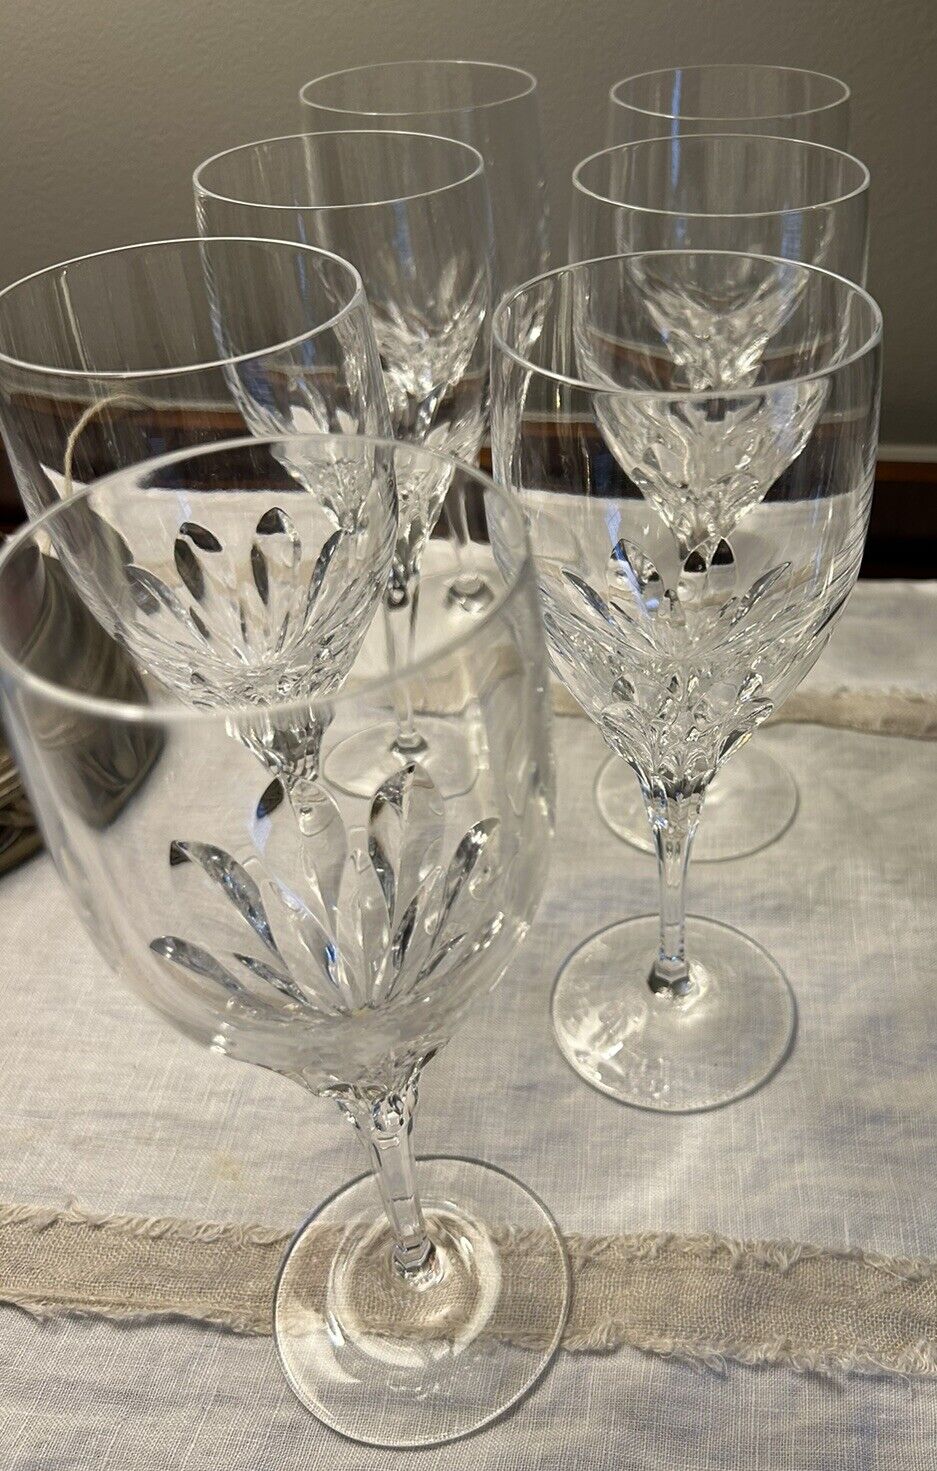 7 Gorham Crystal Diamond Cut Clear  8 3/8” Water Goblets Discontinued 2007